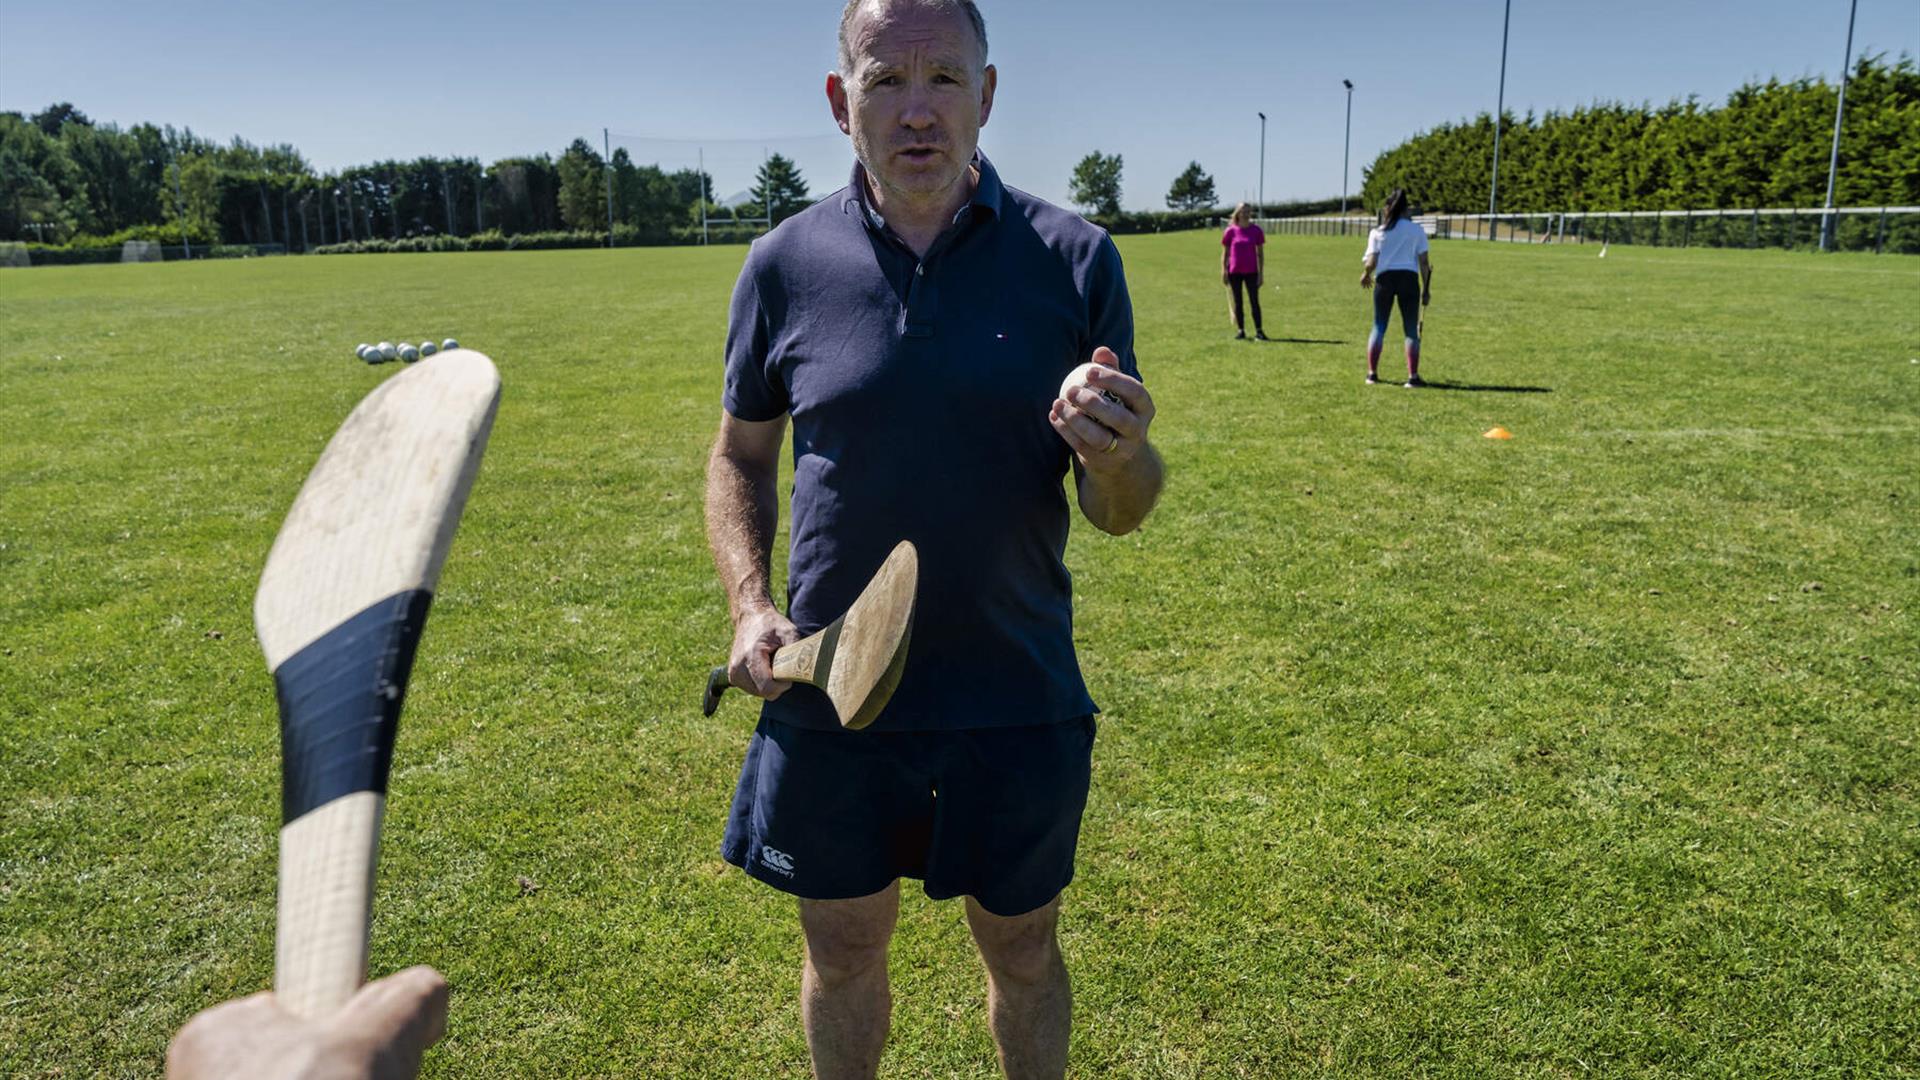 Down All Ireland Champion Ross Carr hosts a hurling skills section as part of the experience, teaching you the basics